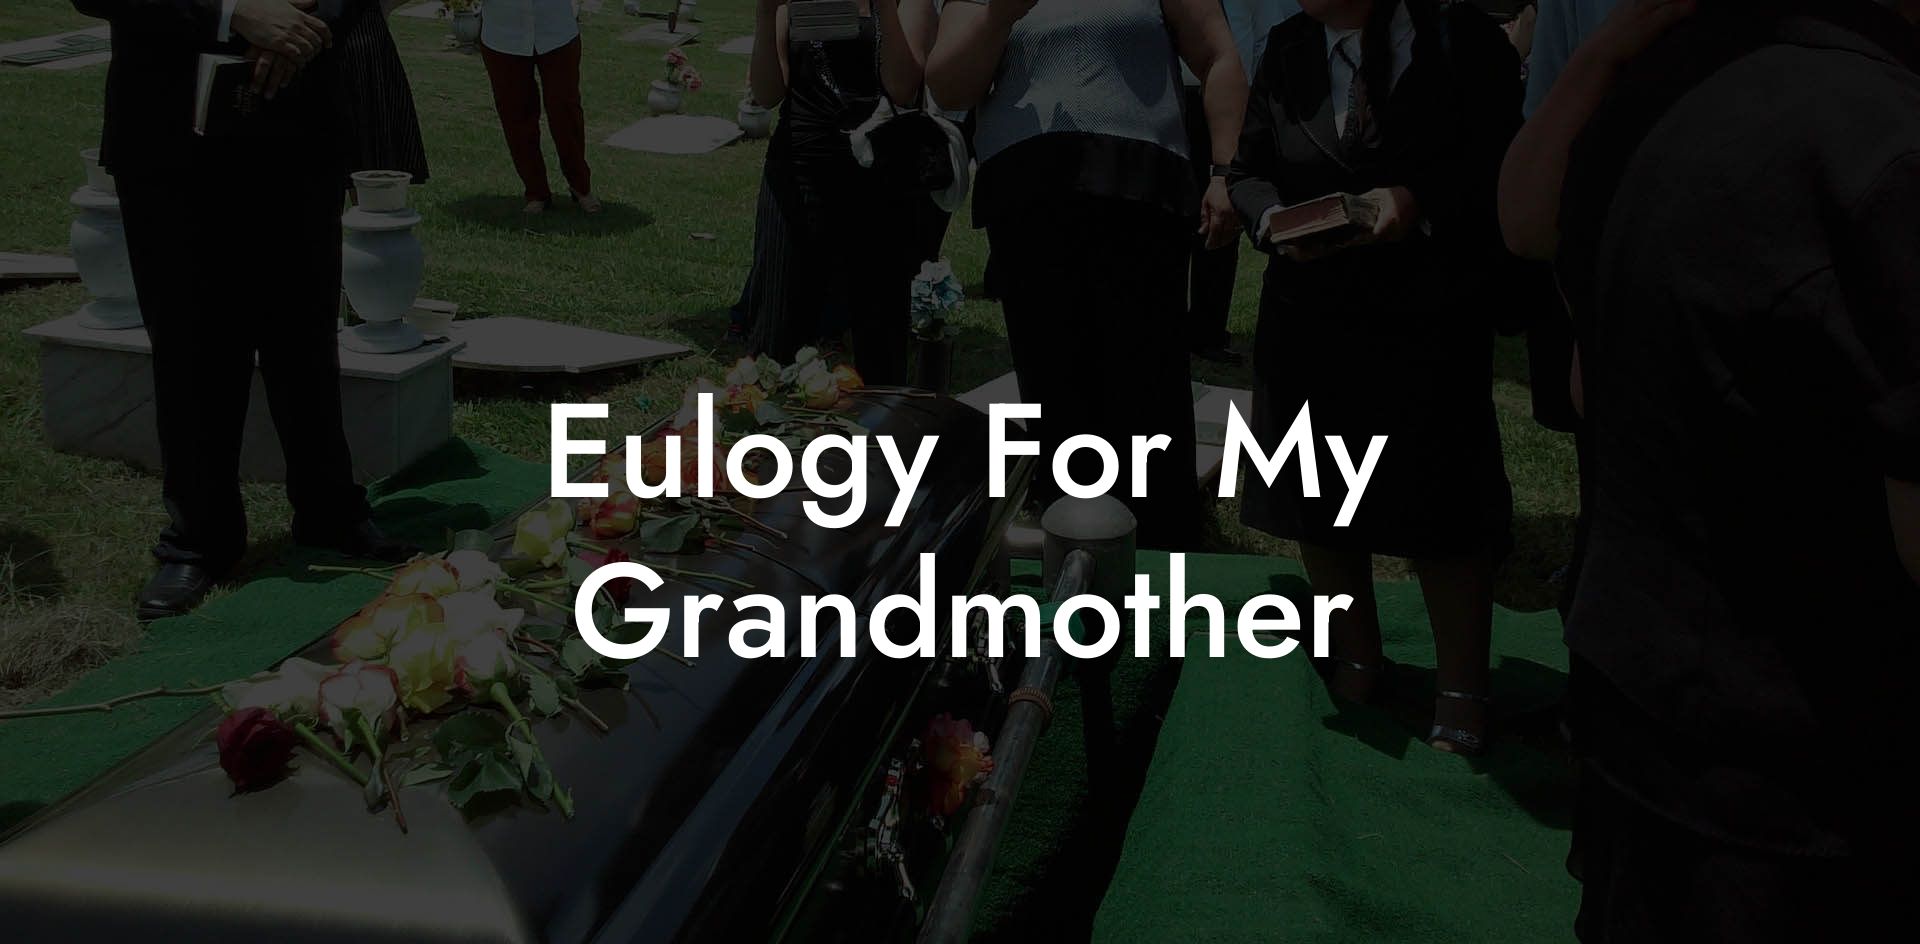 Eulogy For My Grandmother